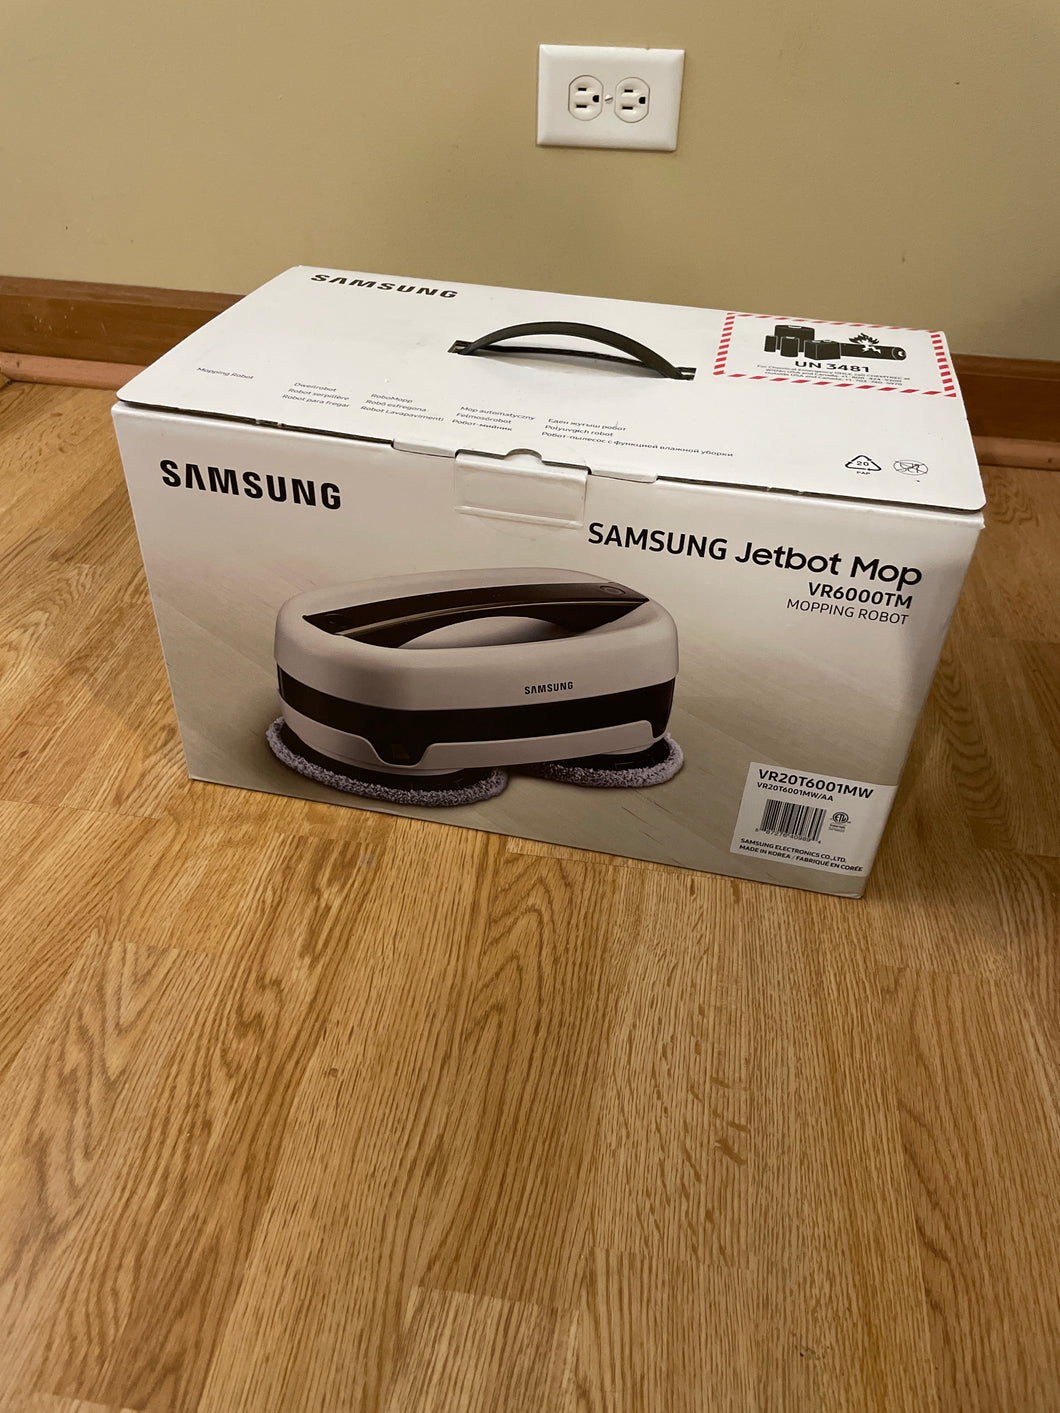 NEW IN BOX never opened Samsung Jetbot Mop